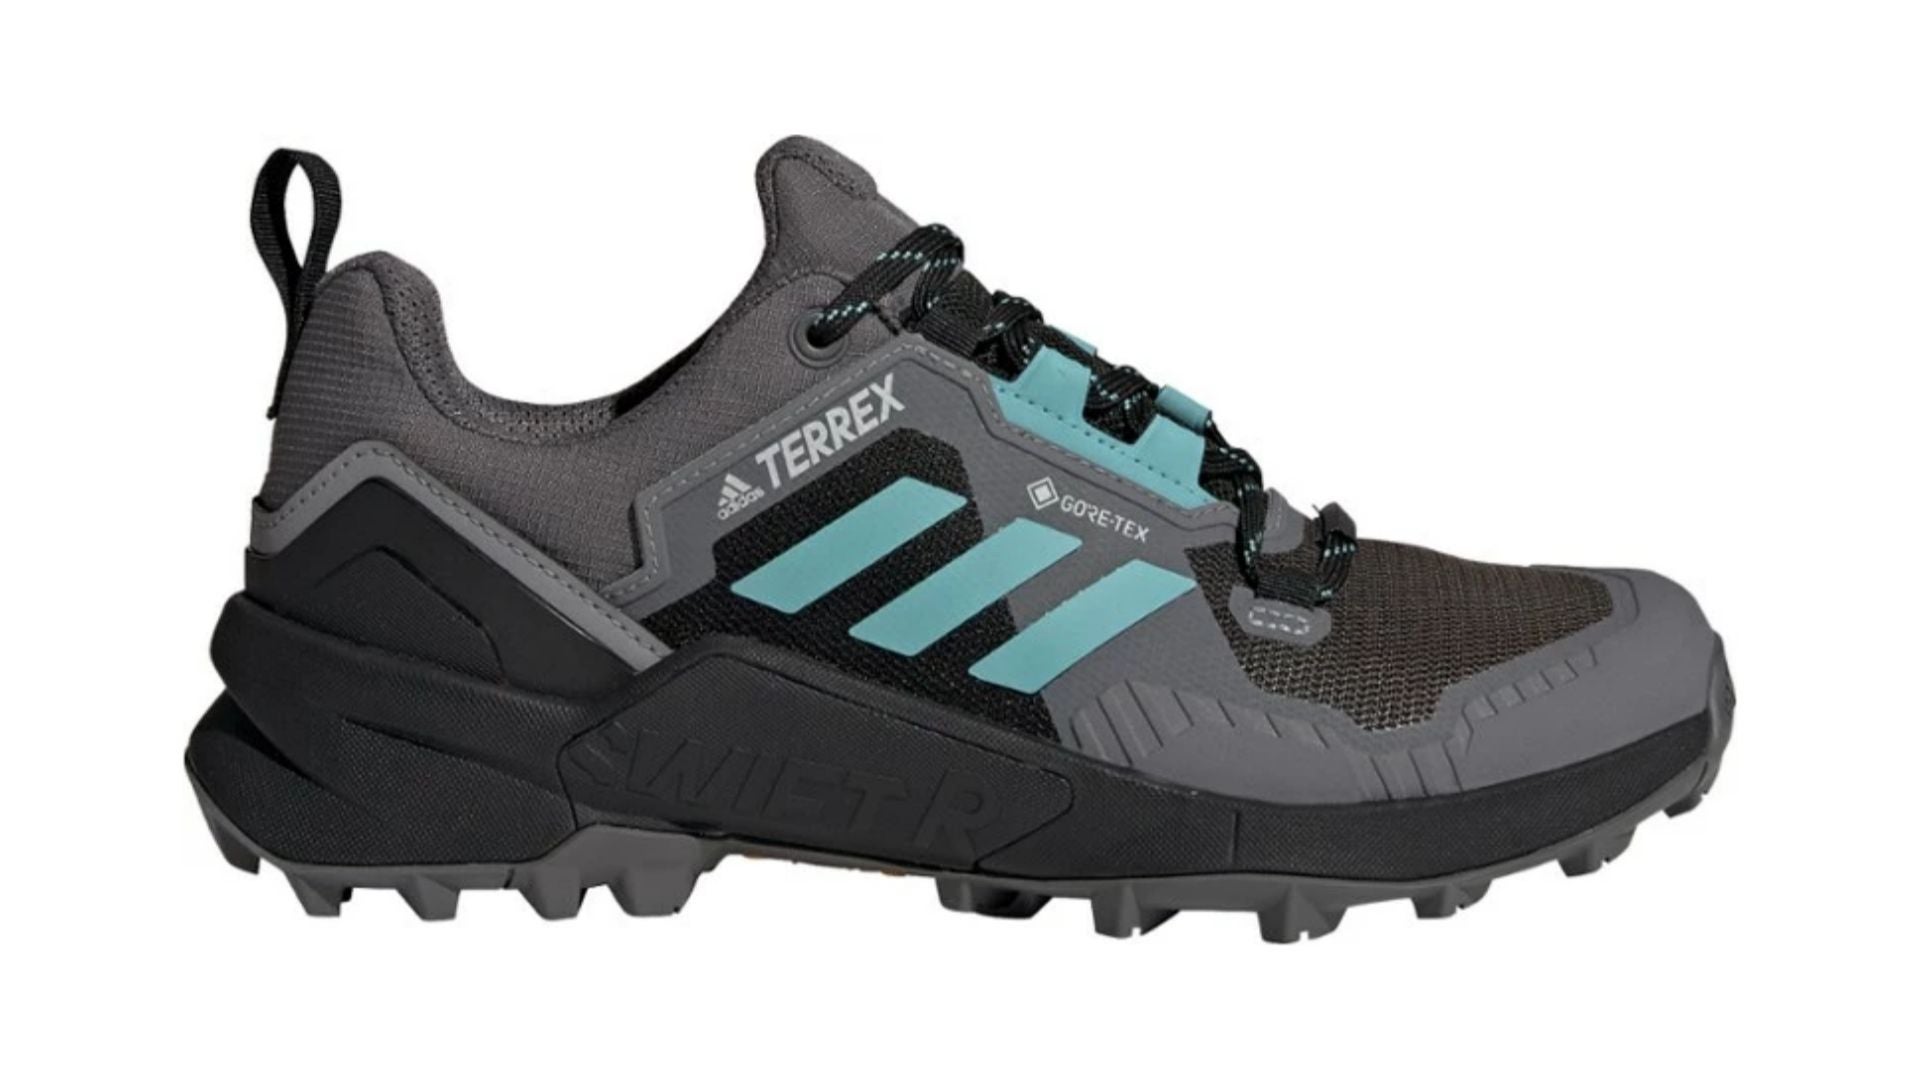 Best adidas terrex hike Hiking Shoes (Review & Buying Guide) in 2022 - Task & Purpose